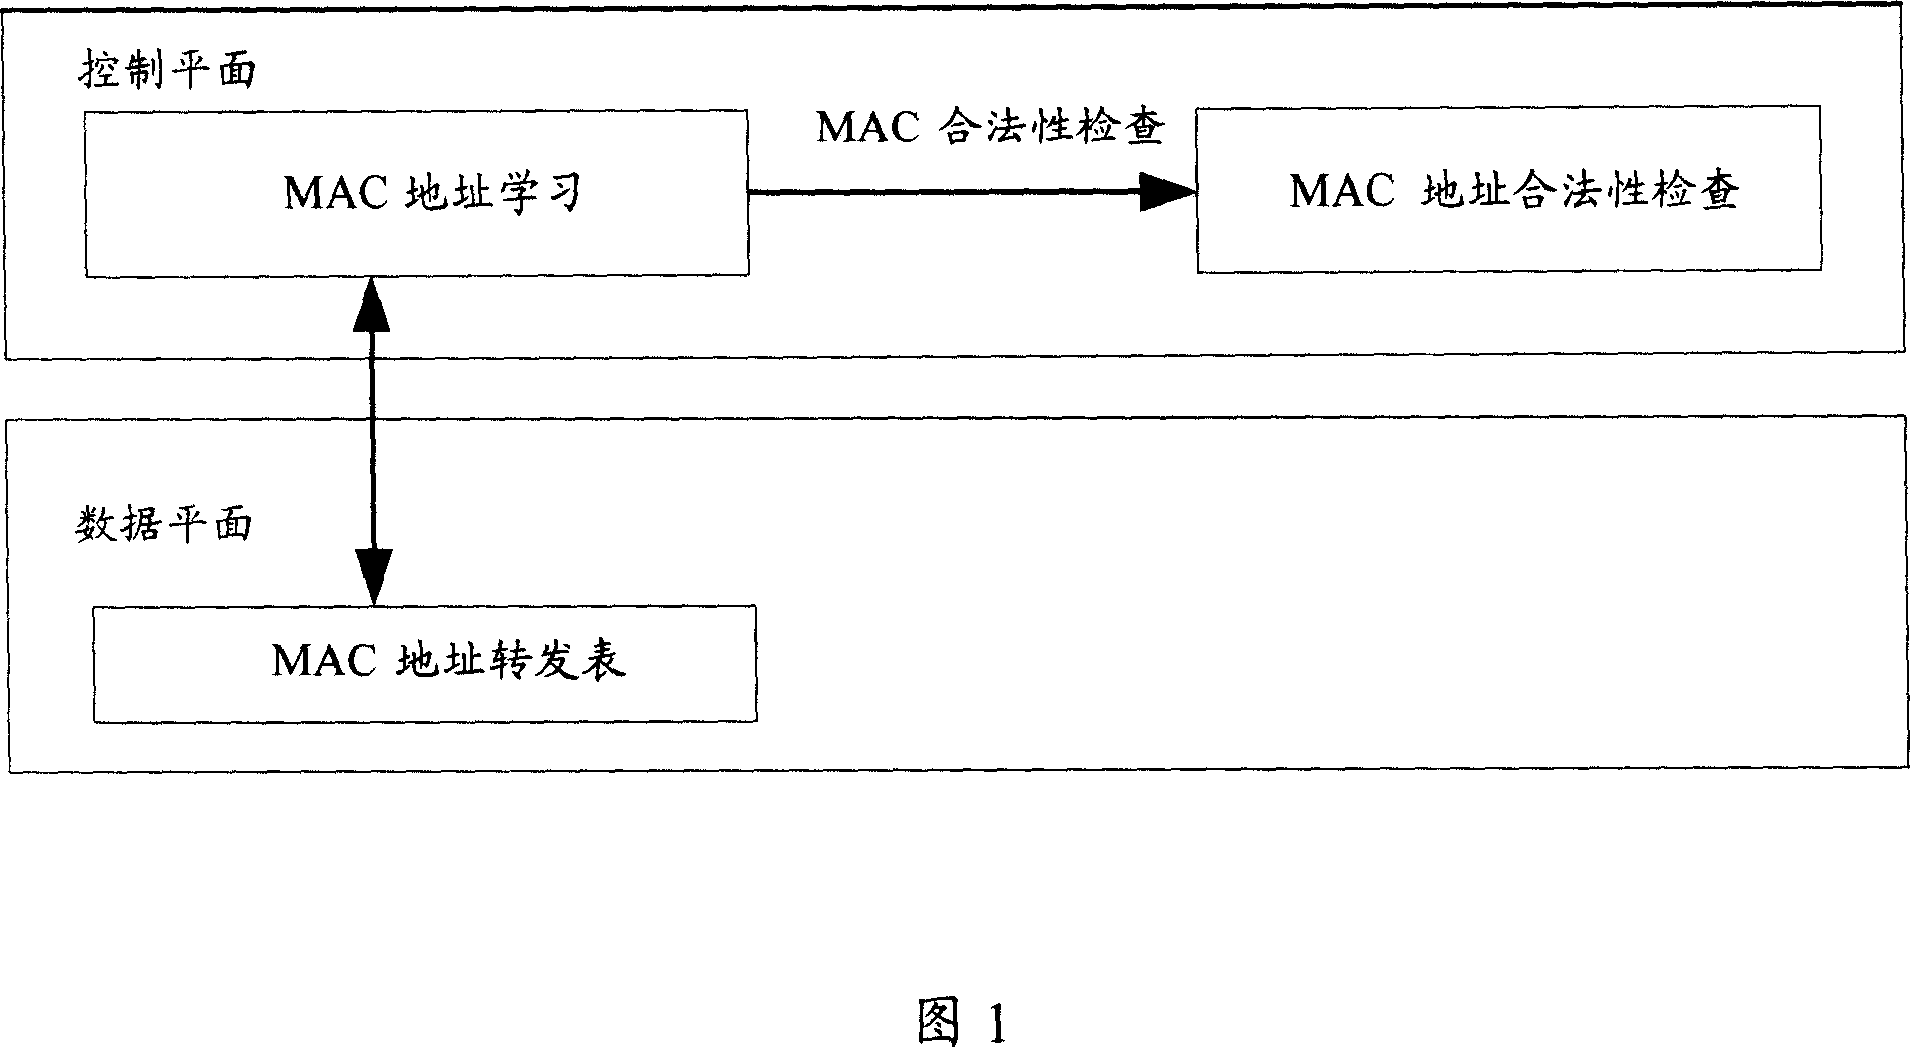 Method for preventing disturbance of medium accessing control address table on access equipment